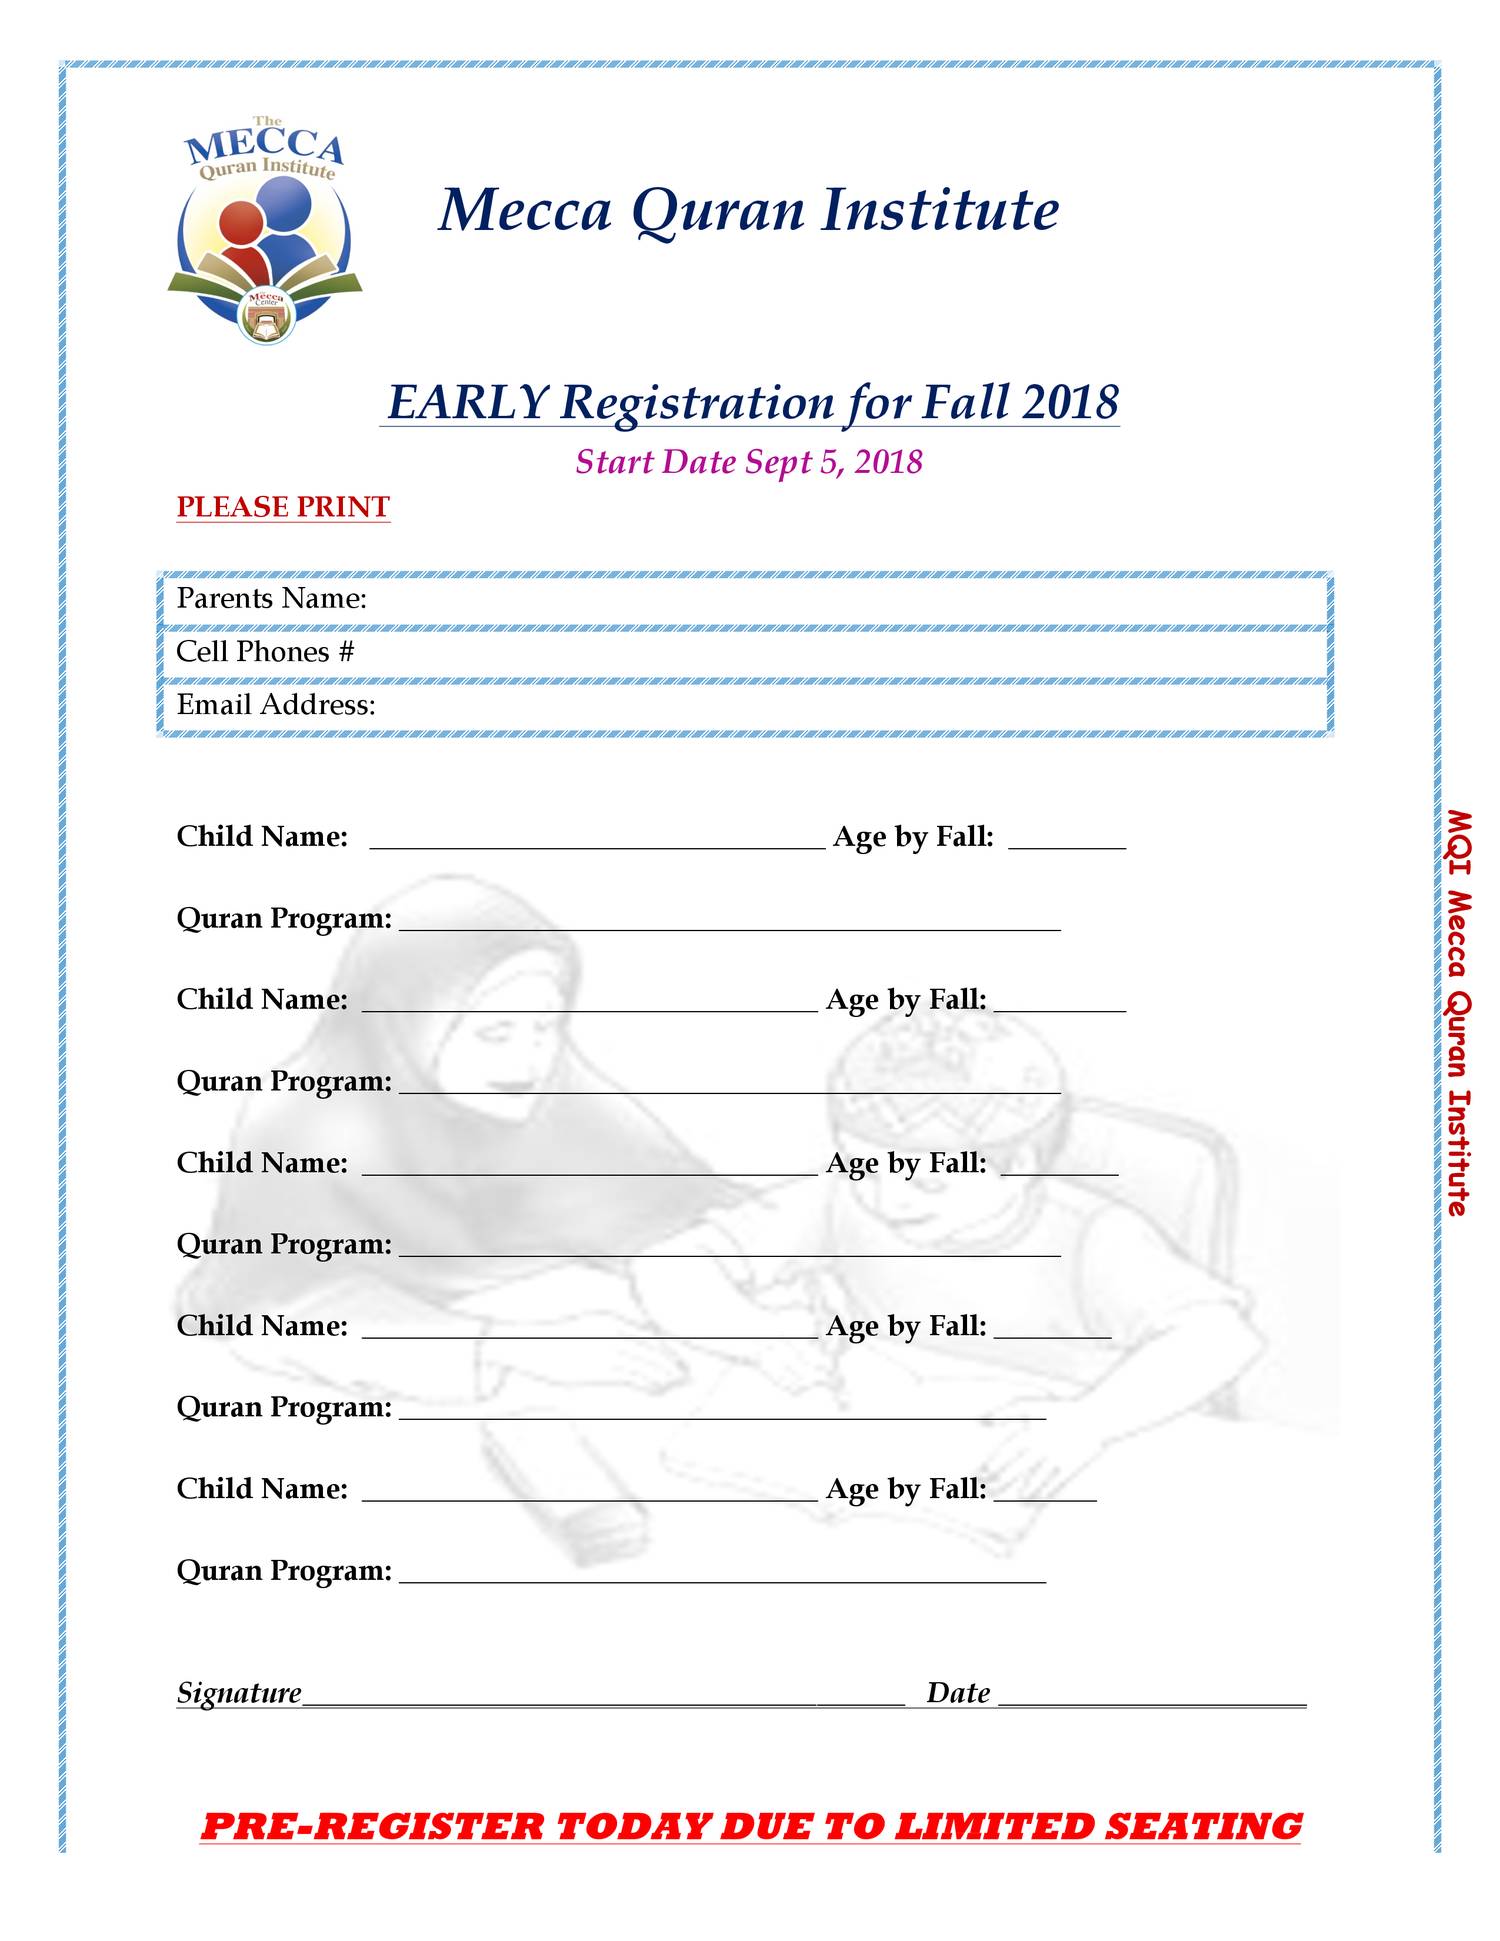 Mecca Quran Institute Fall 2018 Early Registration Form.pdf DocDroid